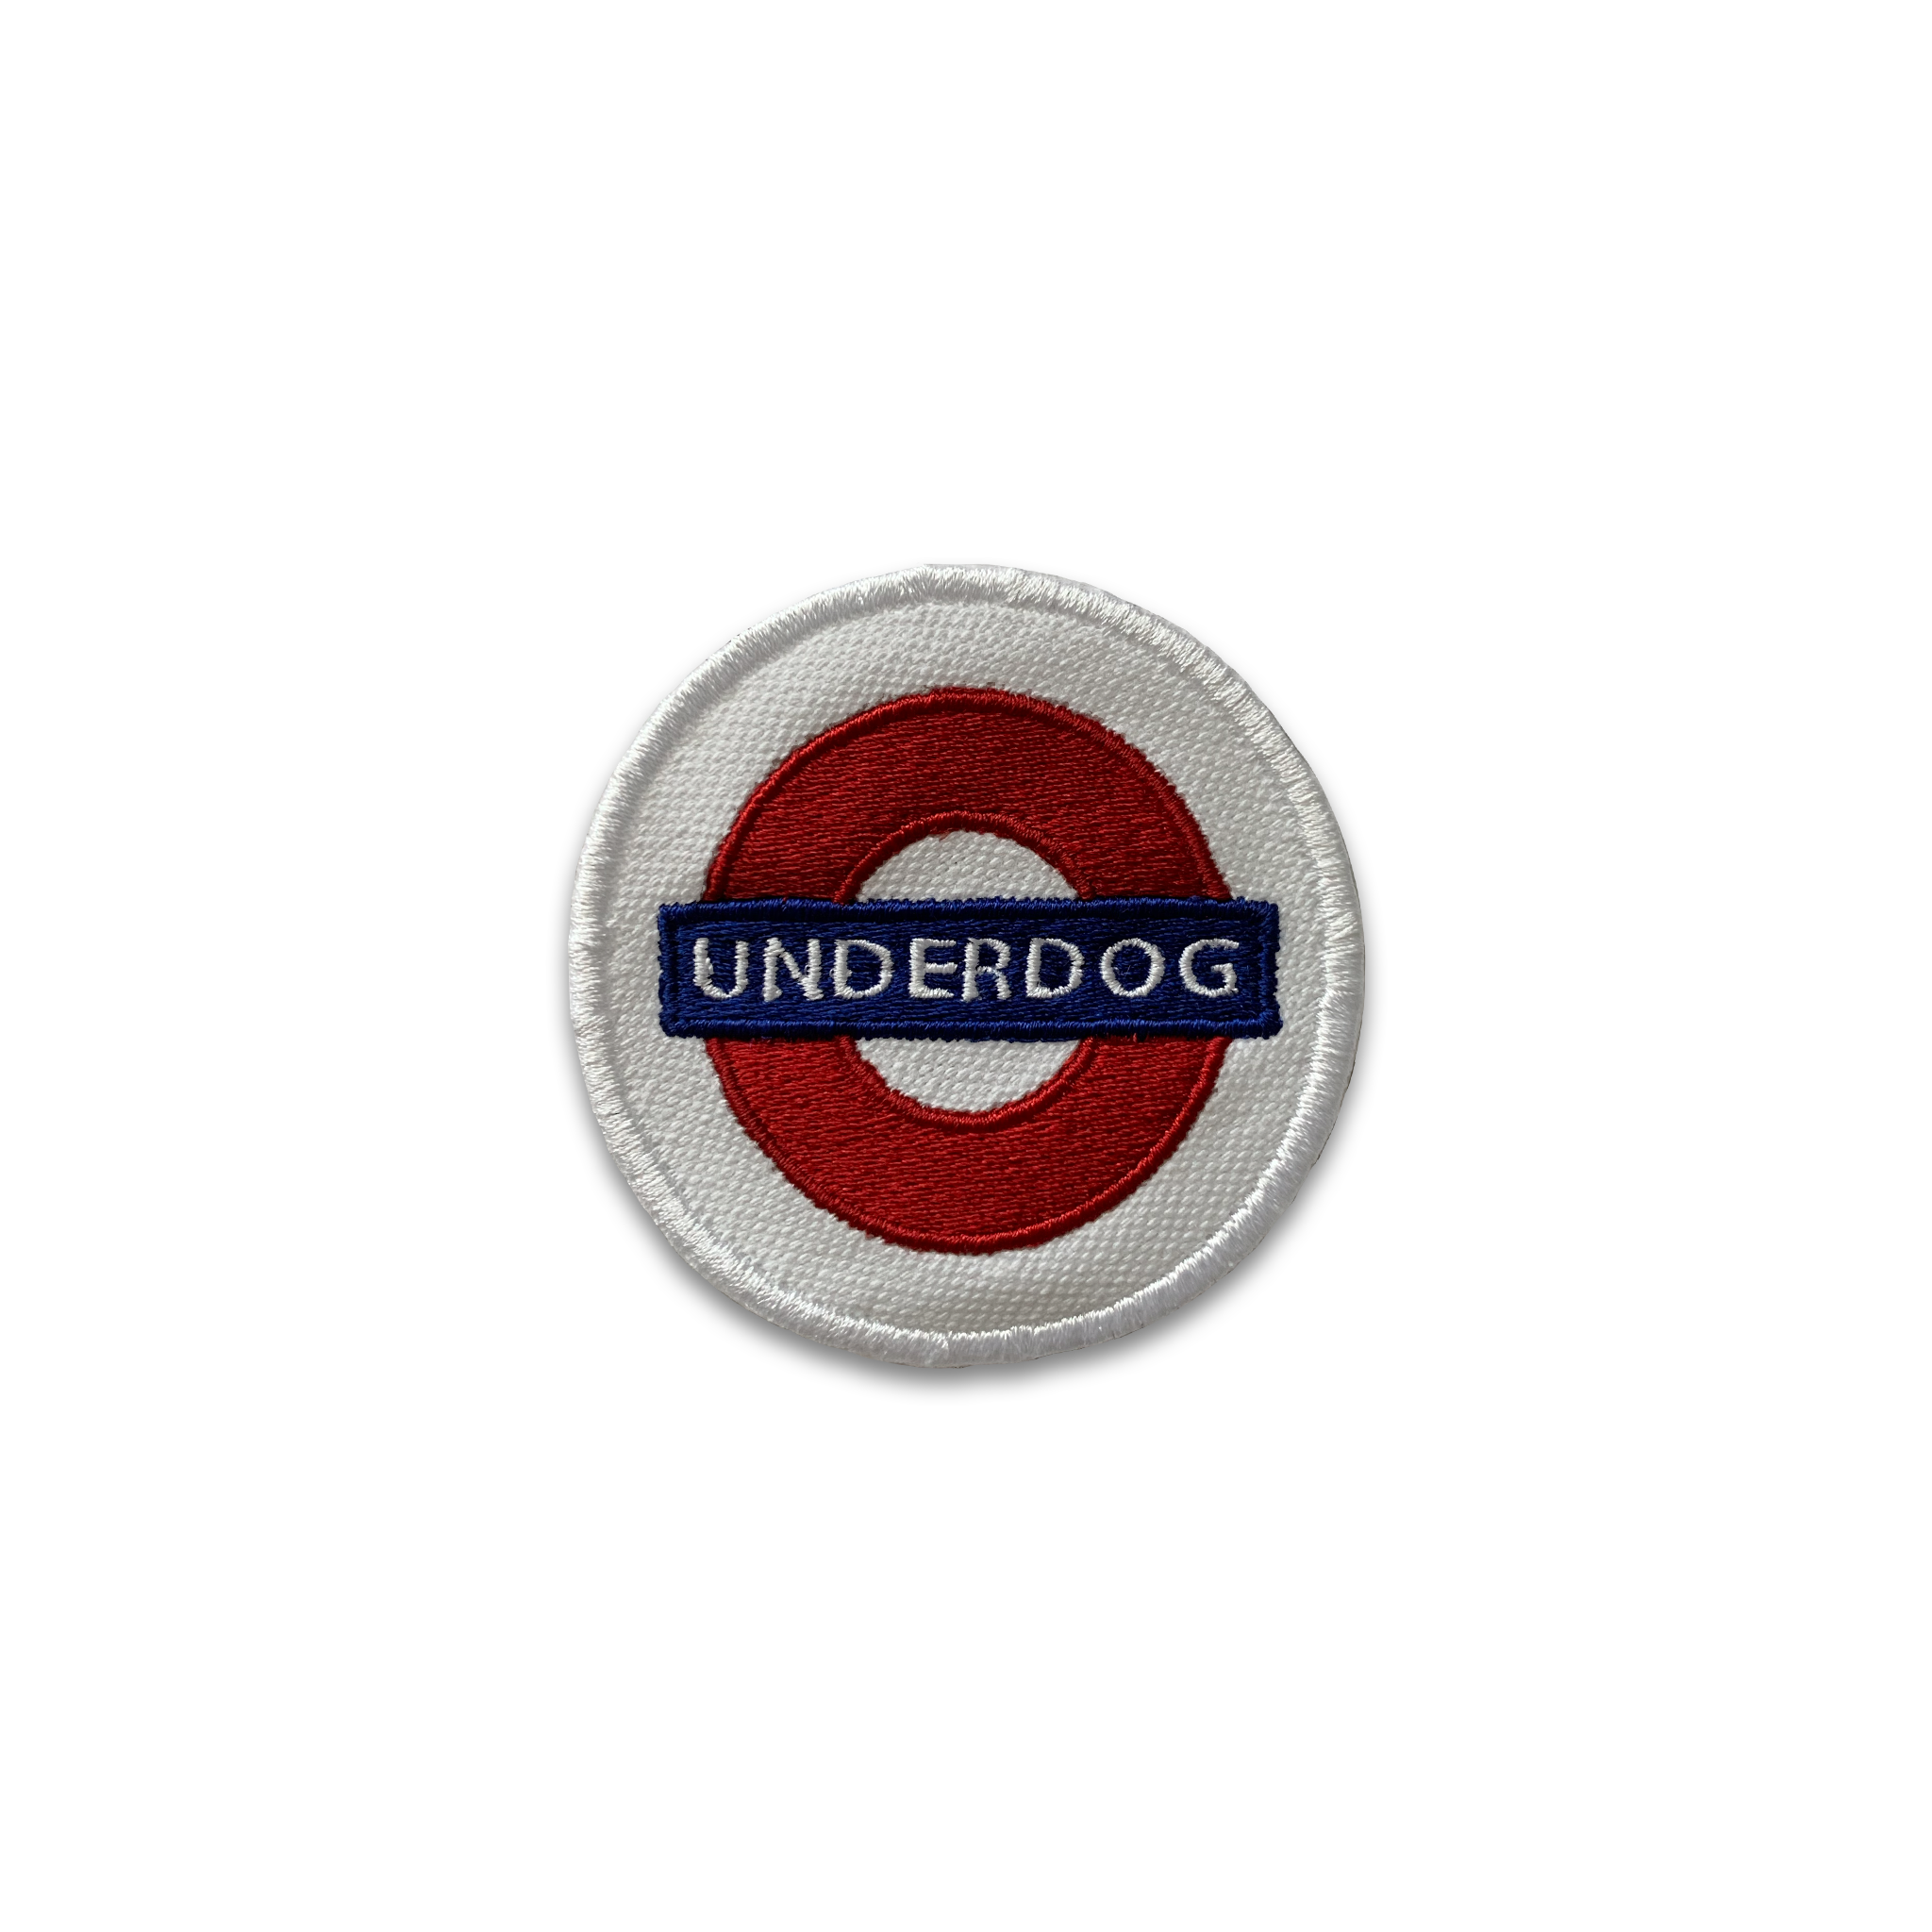 PreMadePatches_White_Underdog_Shopify_816a4ce9-8a42-4247-b1bf-b0c3c5afc43b.png